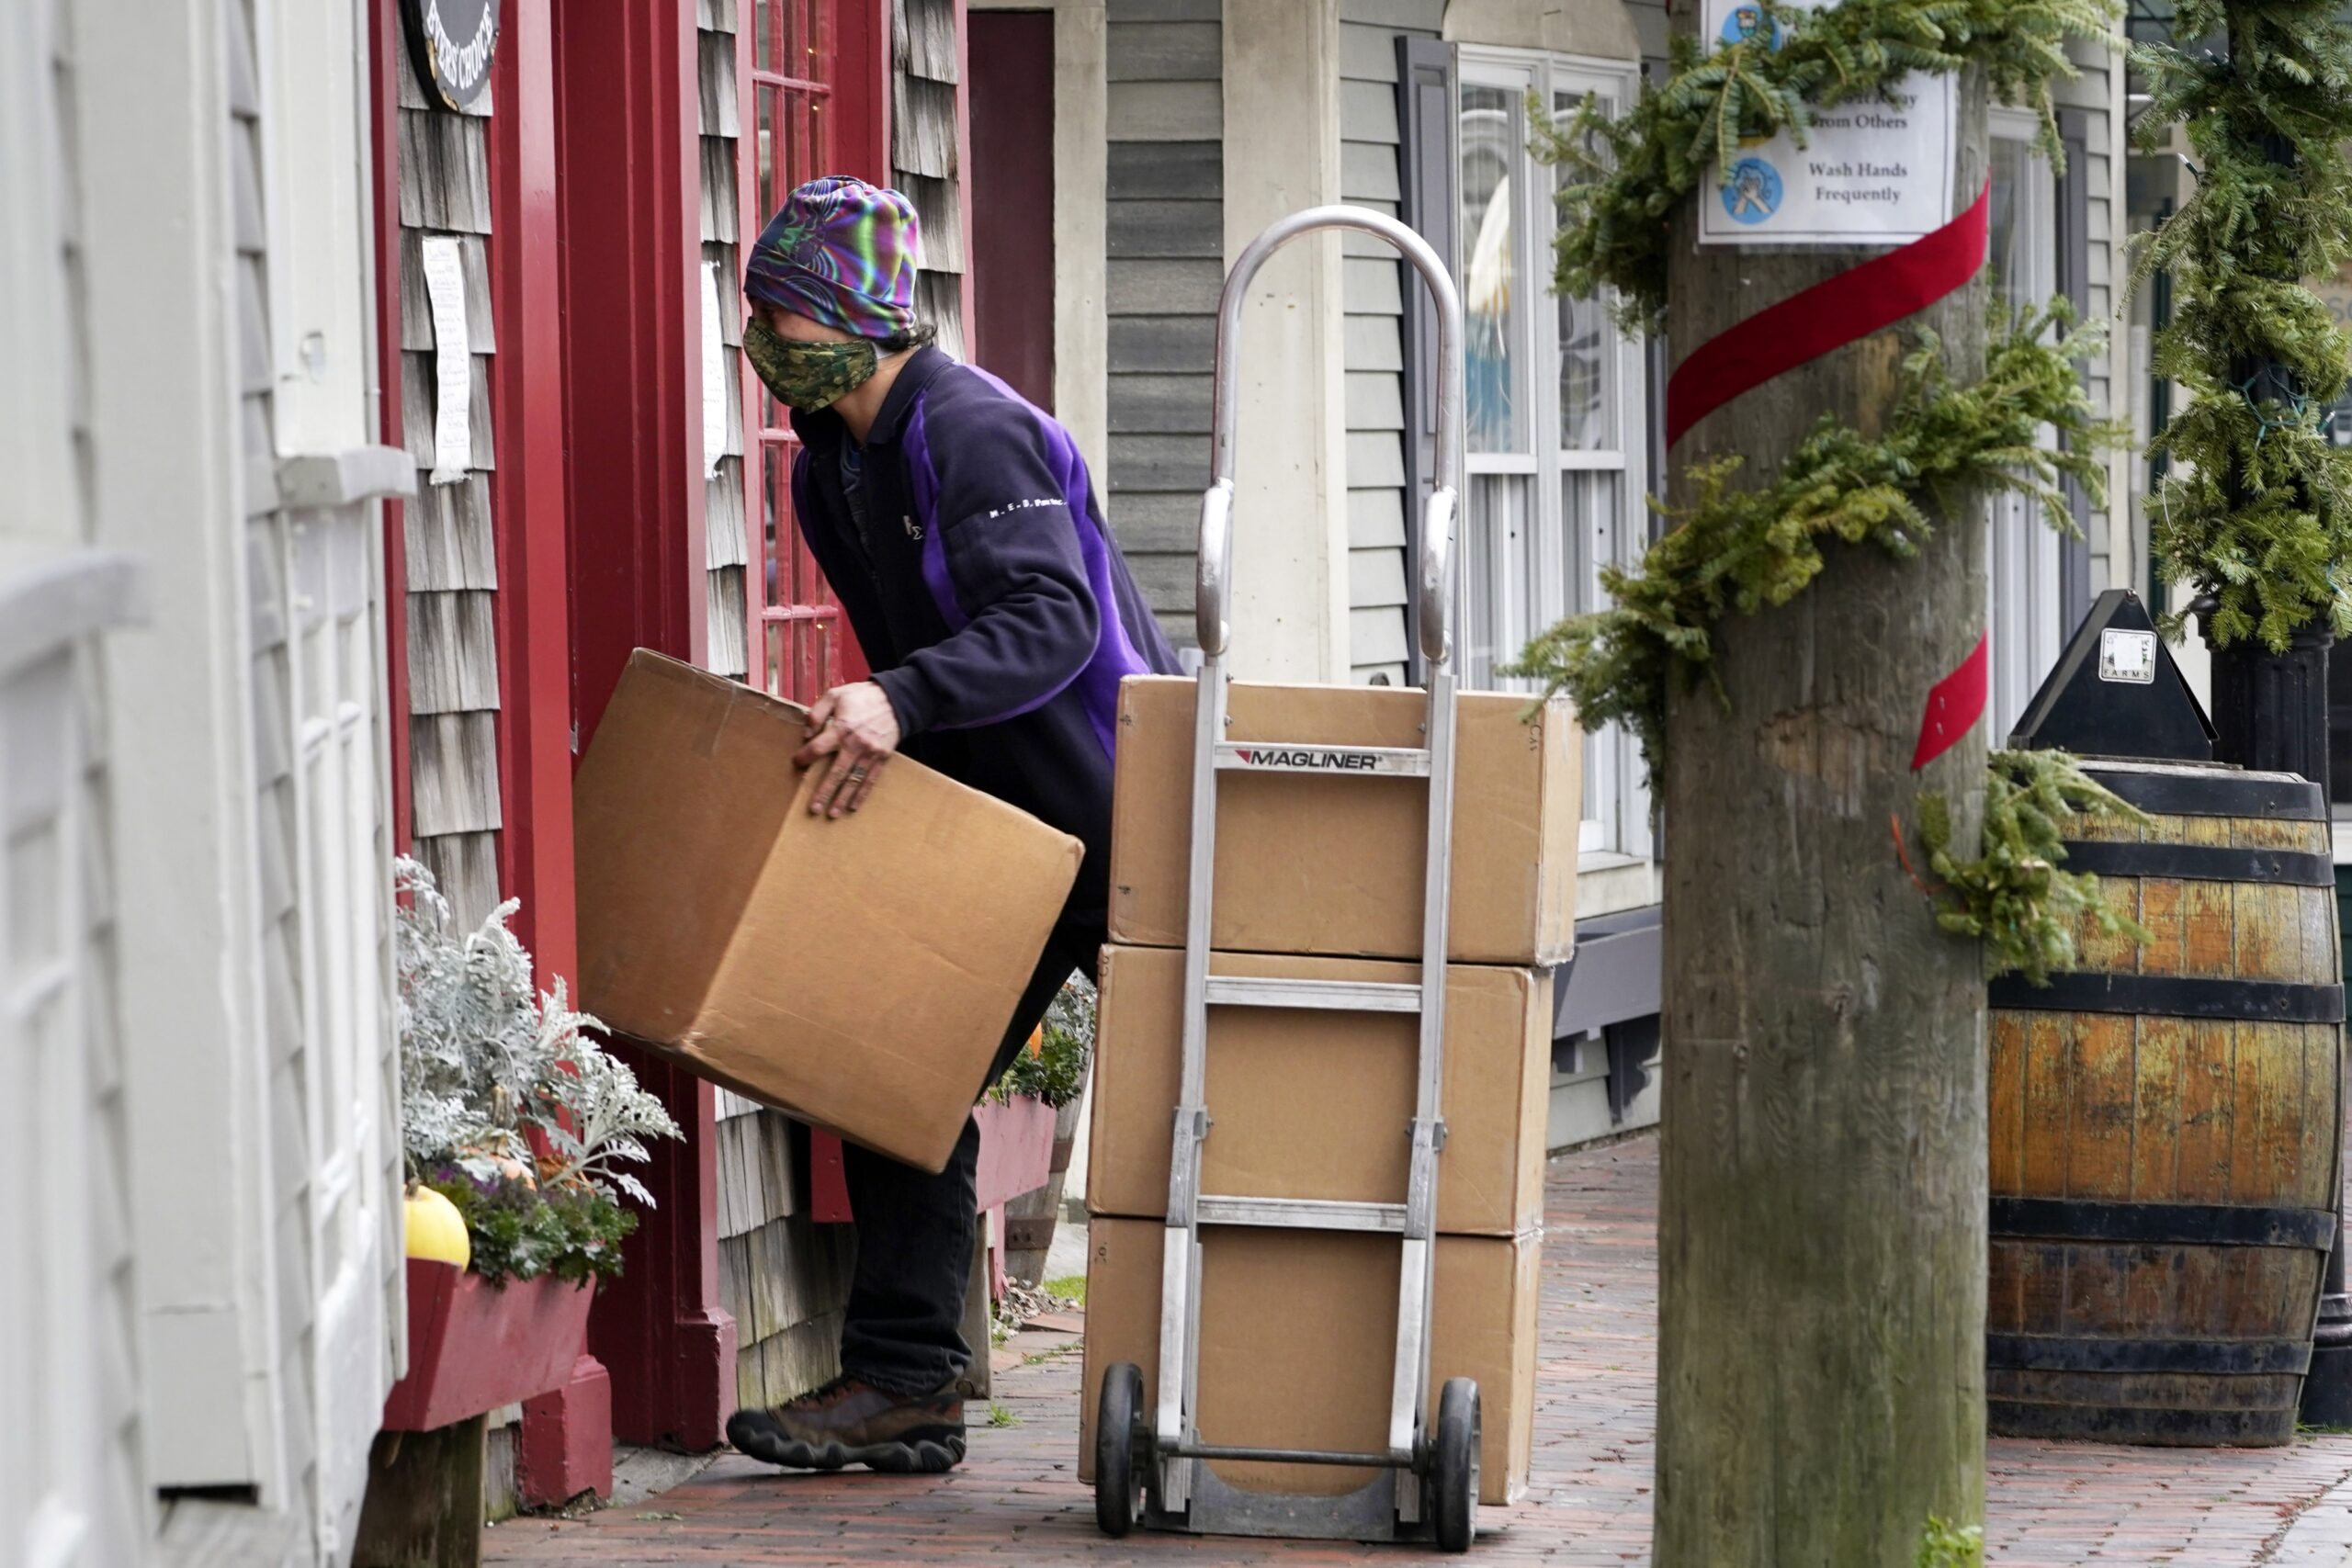 A Fed-Ex worker wearing a facemask makes a delivery